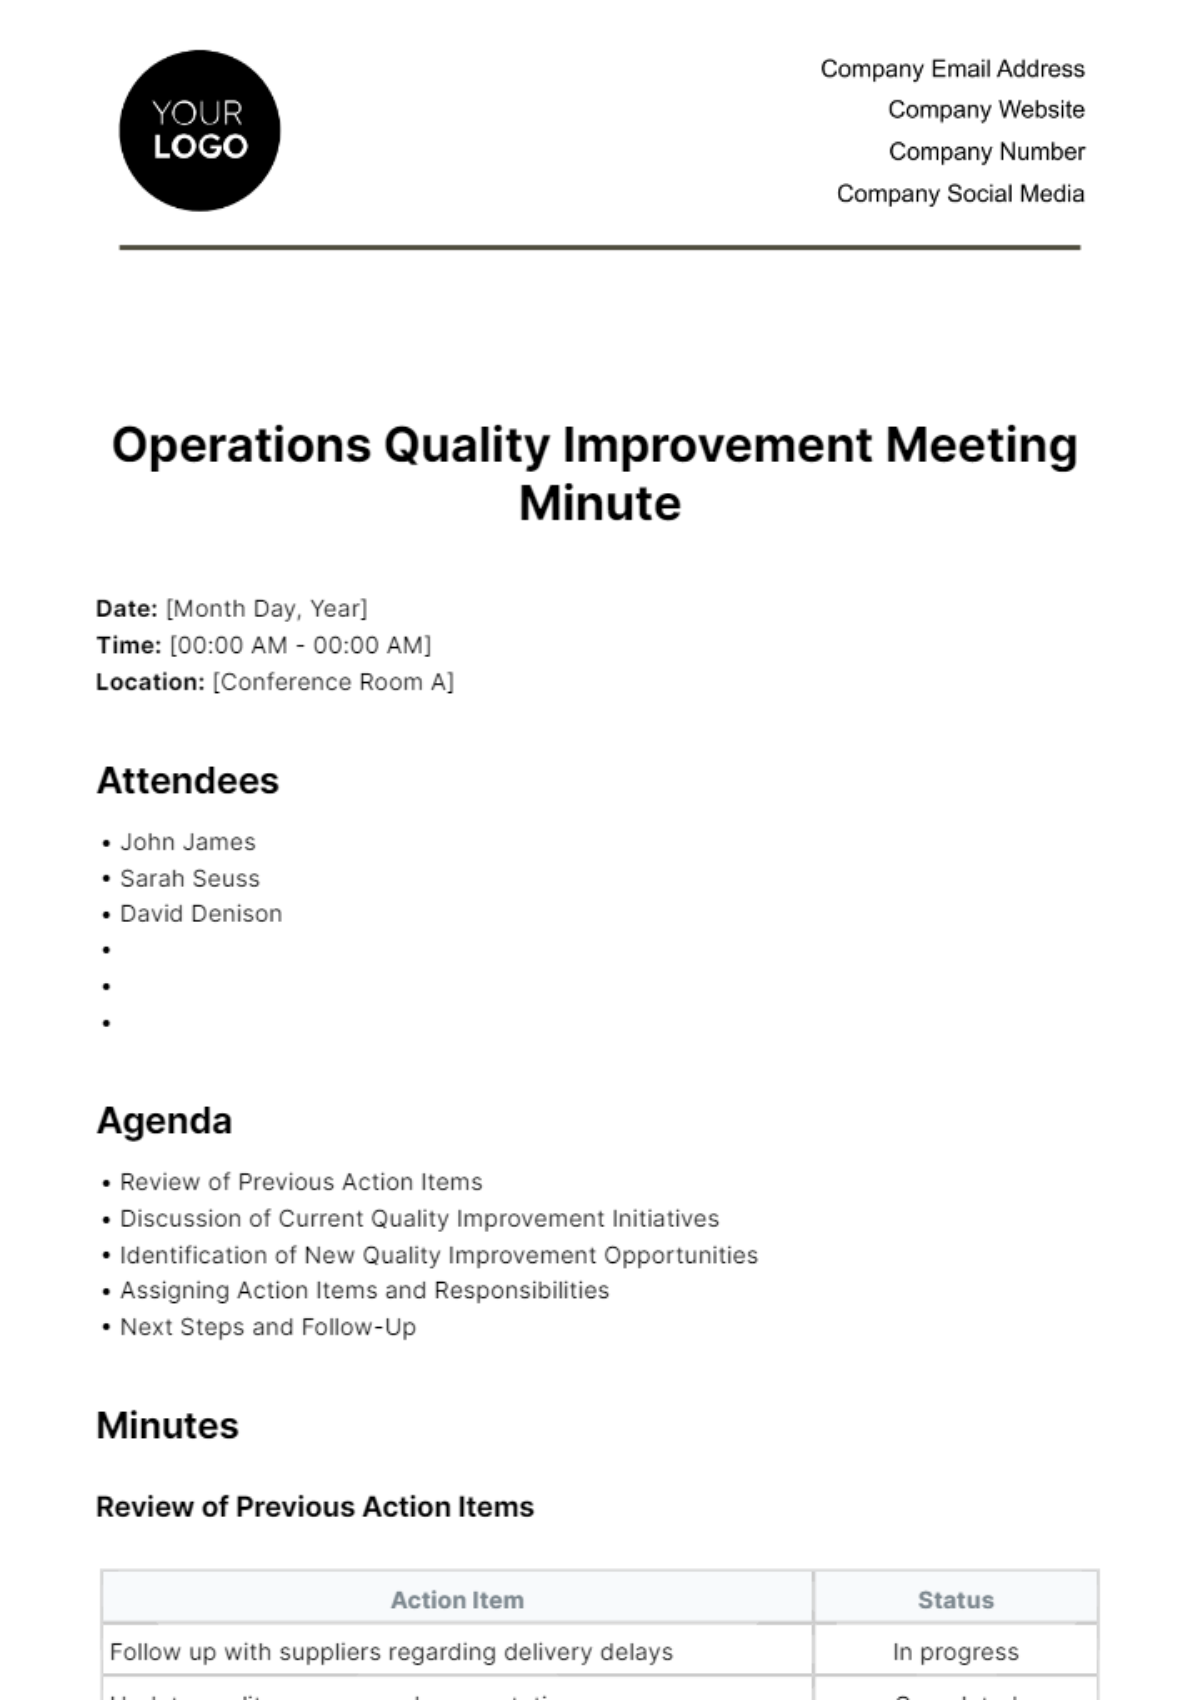 Operations Quality Improvement Meeting Minute Template